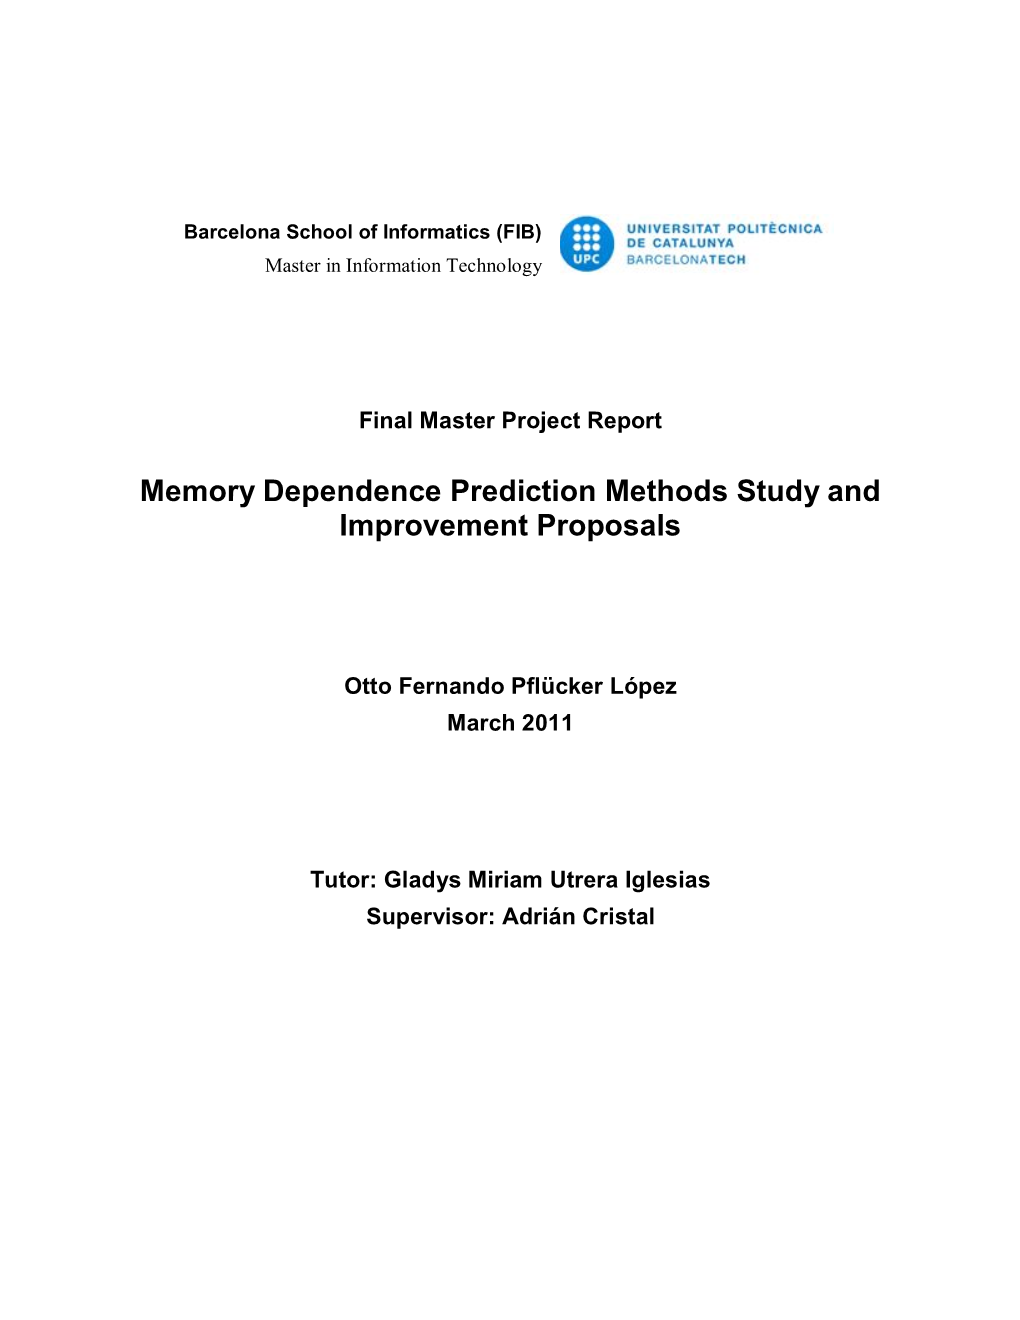 Memory Dependence Prediction Methods Study and Improvement Proposals